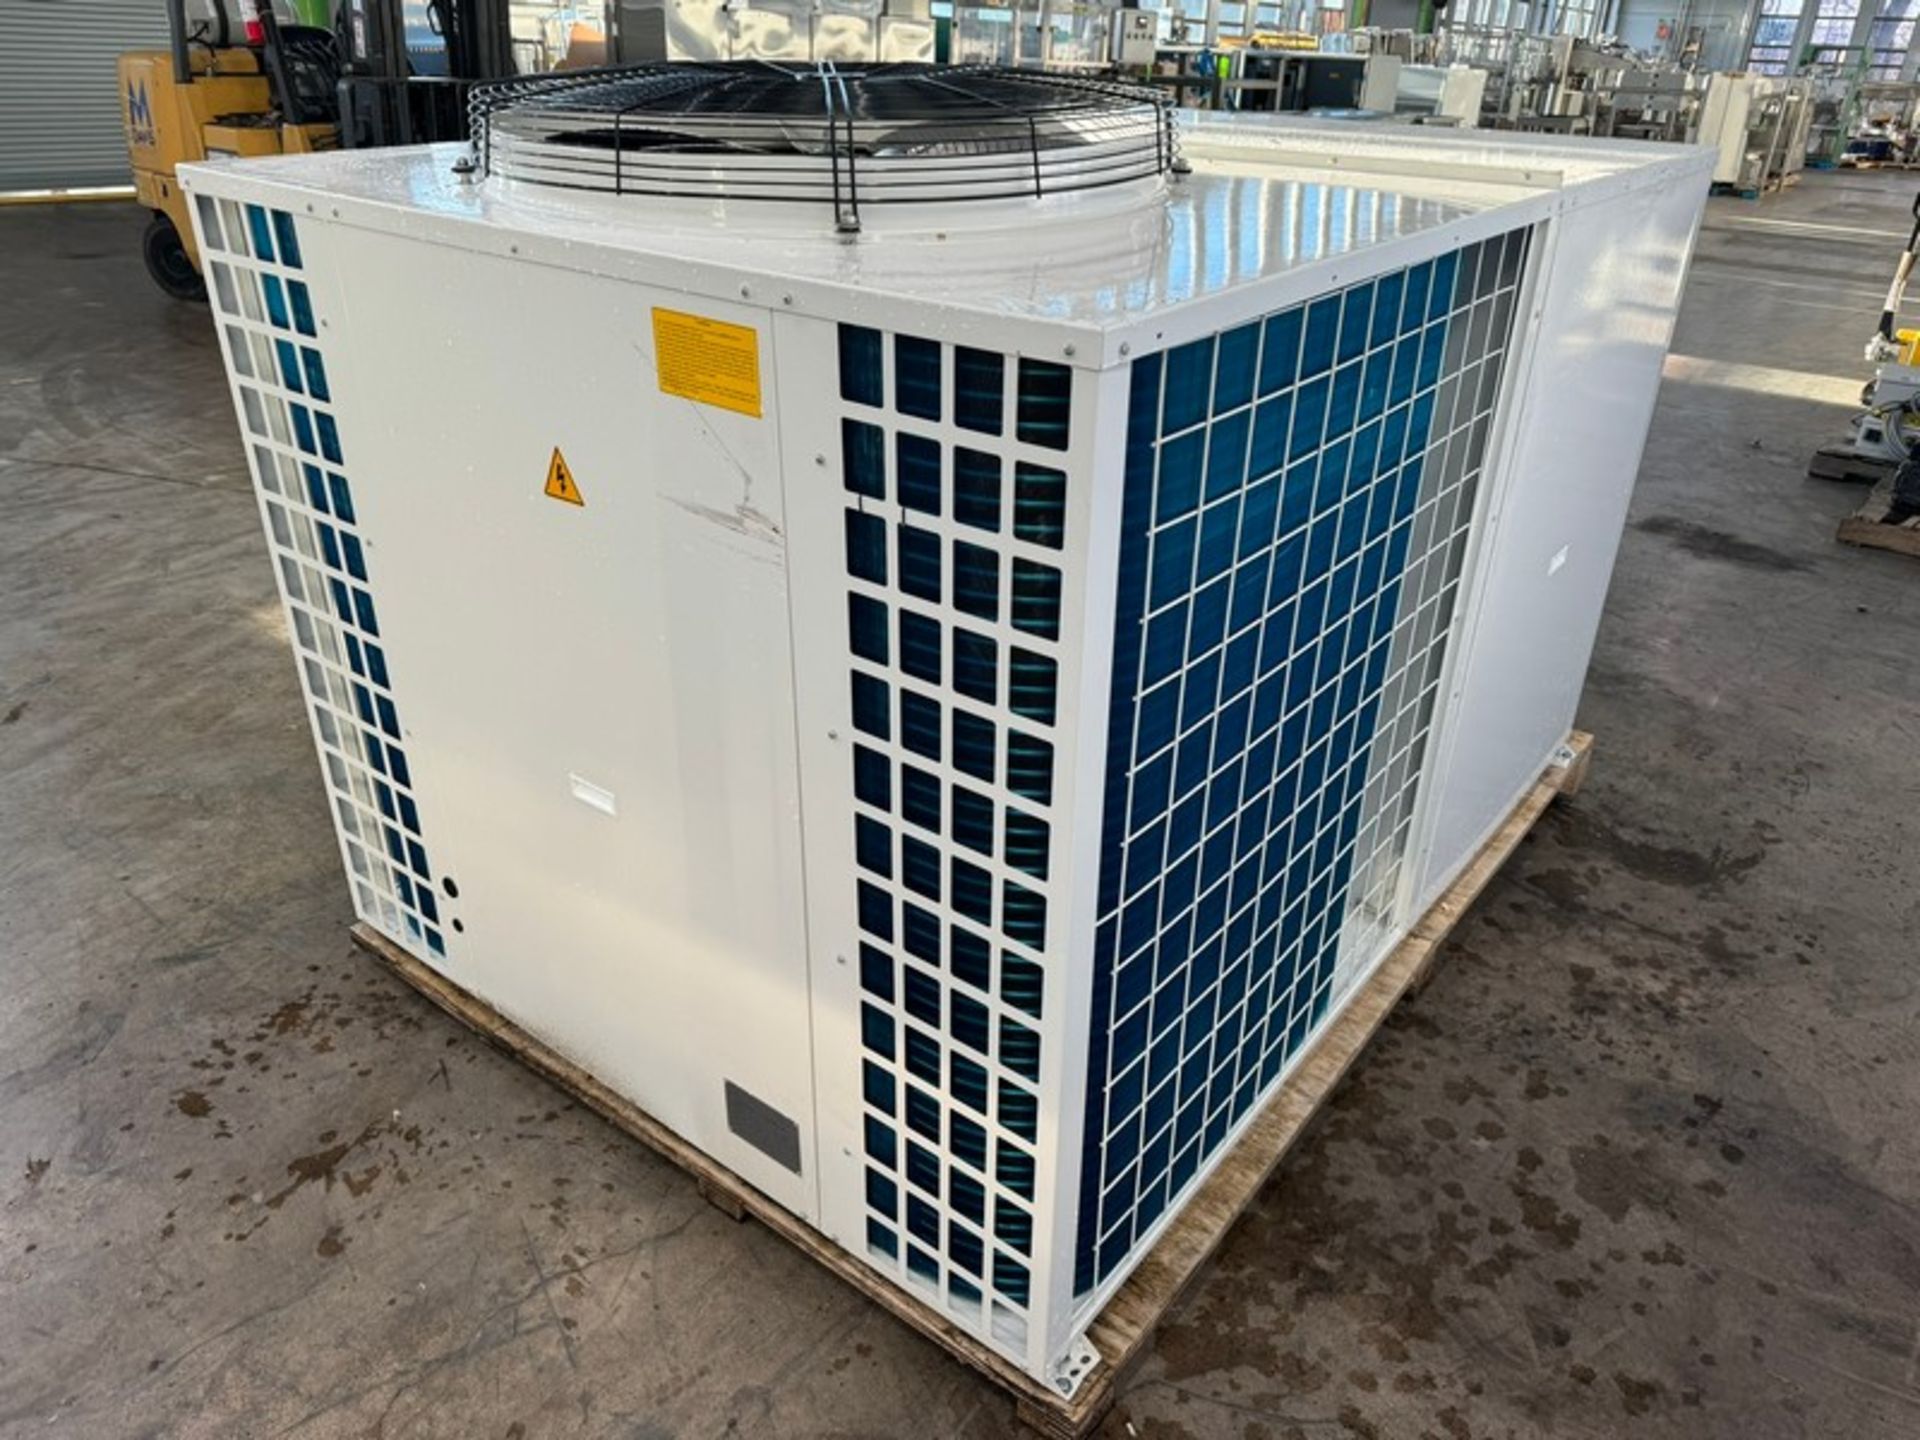 NEW 2022 SHENHLIN Roof Mounted Air Cooled Package Unit, S/N C5020221018R001, Cooling Capacity 70 kW, - Image 6 of 7